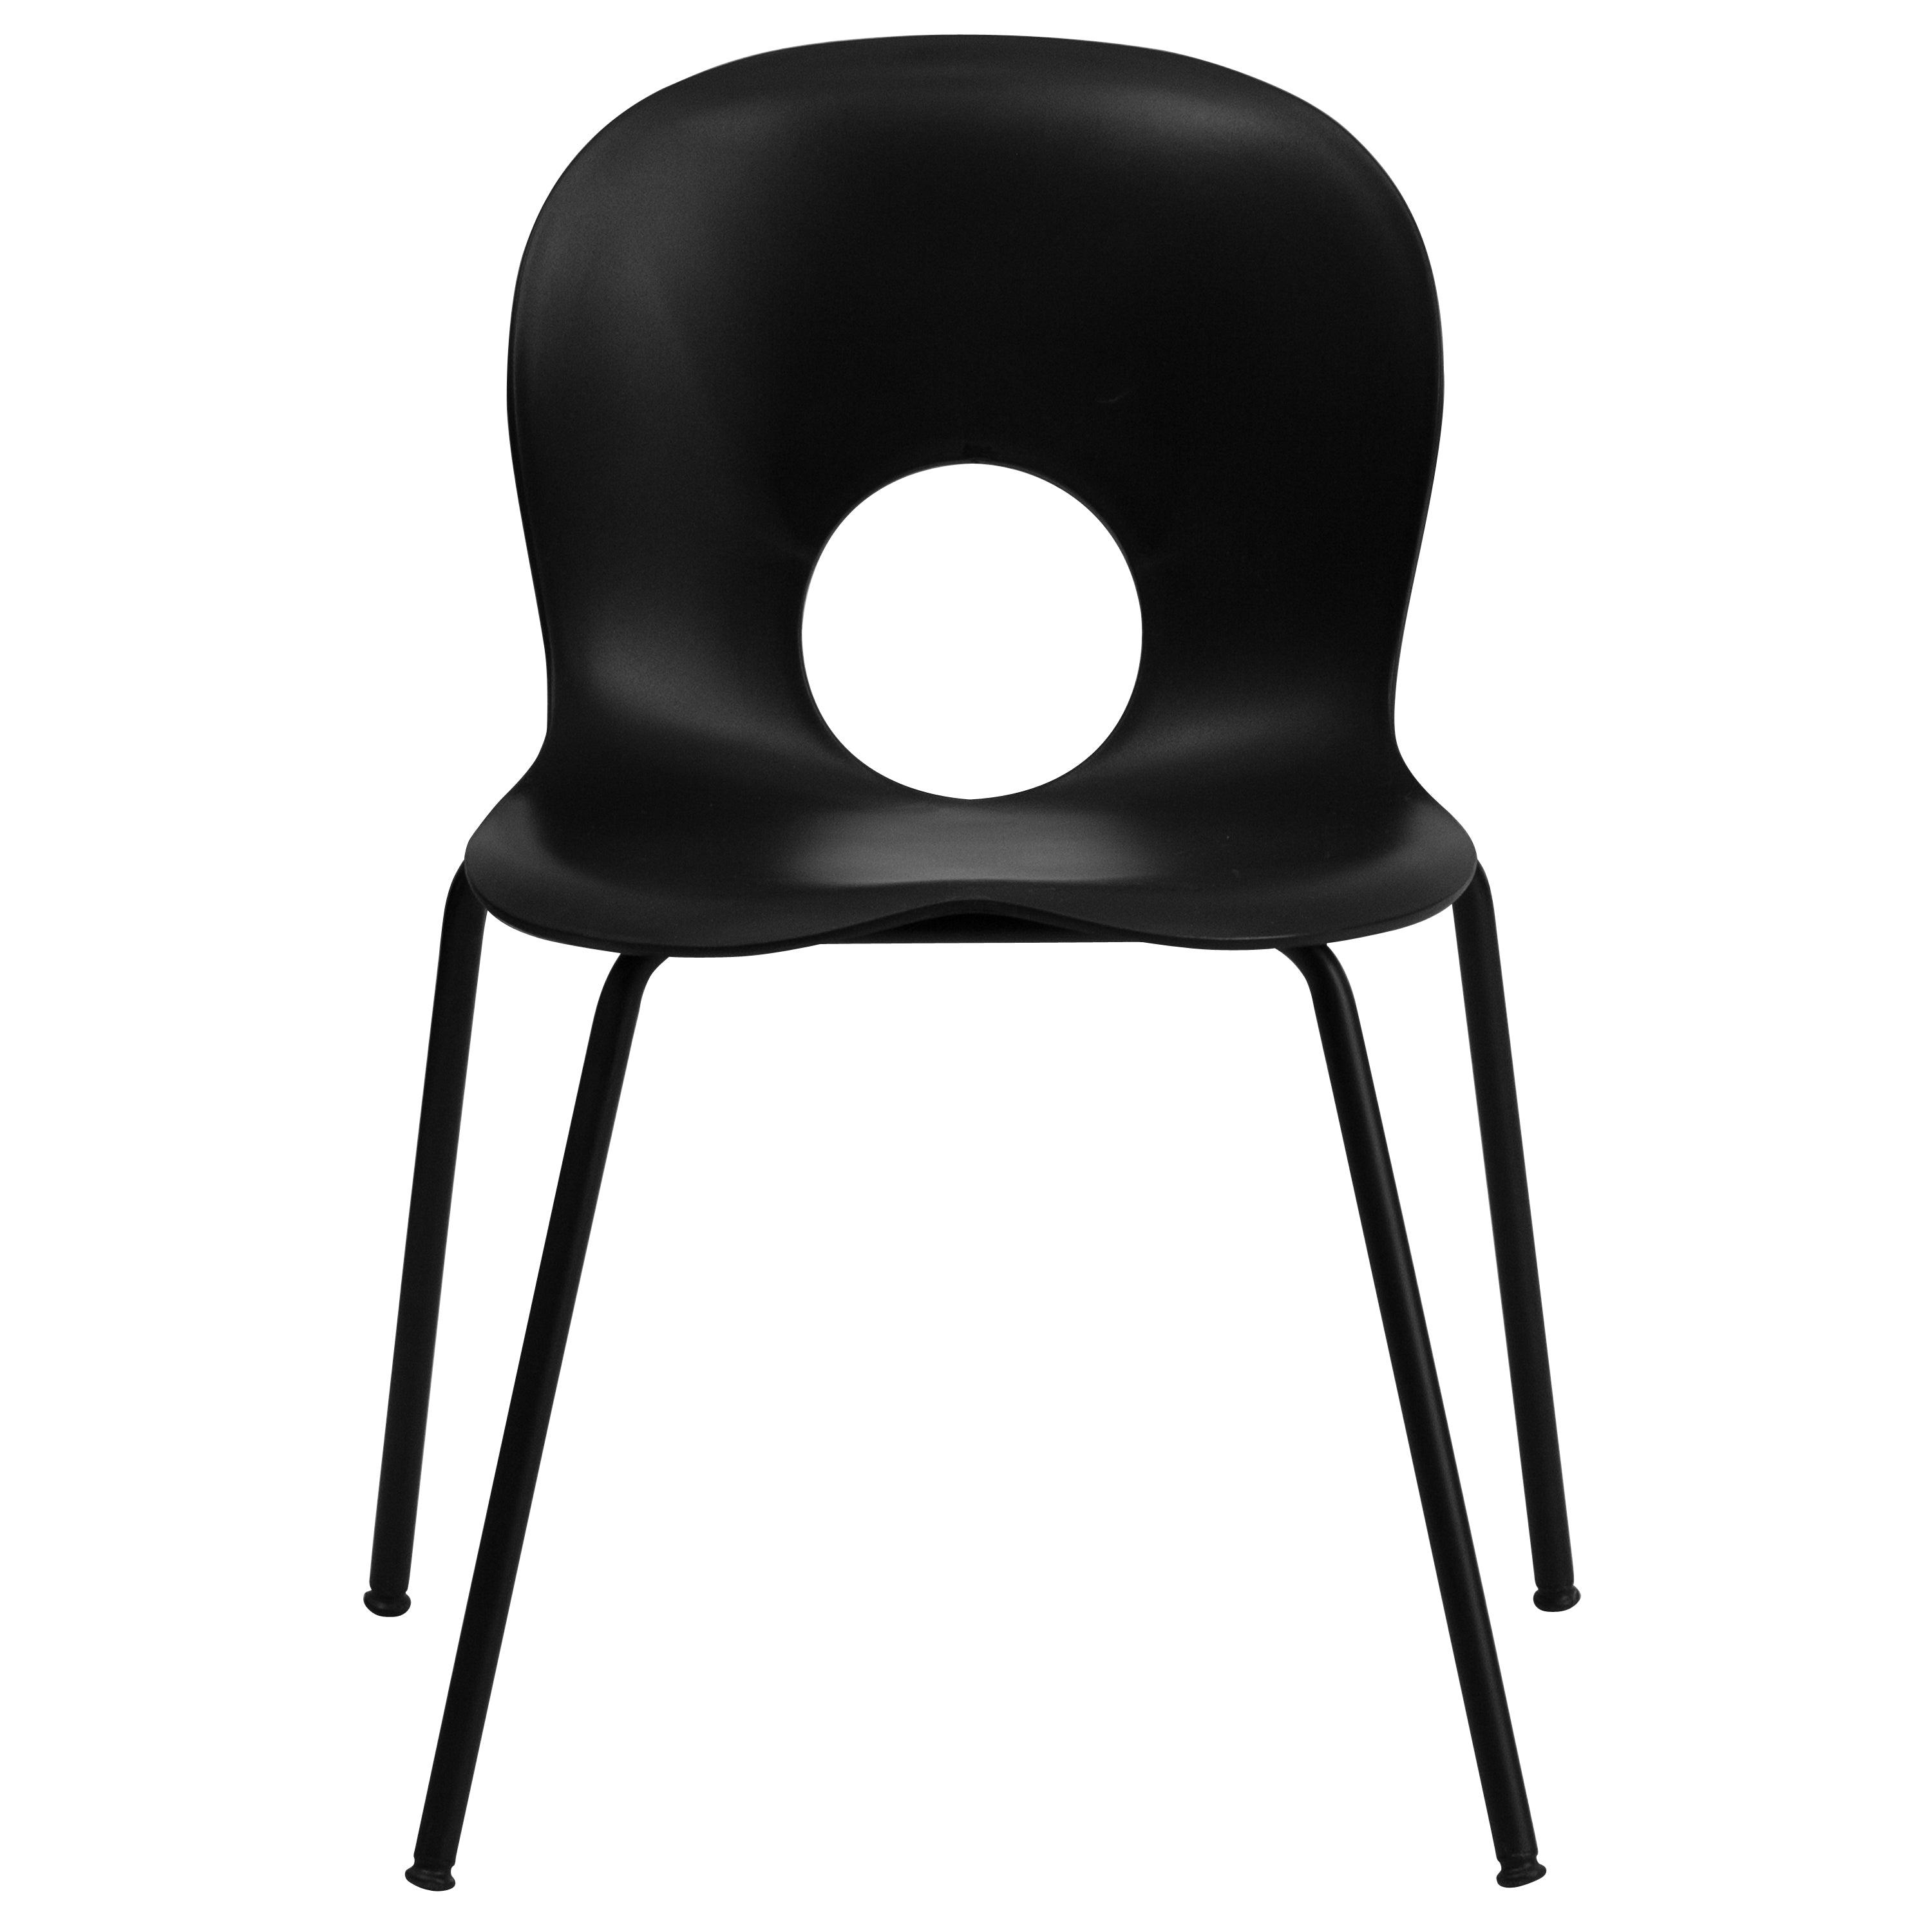 HERCULES Series 770 lb. Capacity Designer Plastic Stack Chair with Black Frame-Plastic Stack Chair-Flash Furniture-Wall2Wall Furnishings